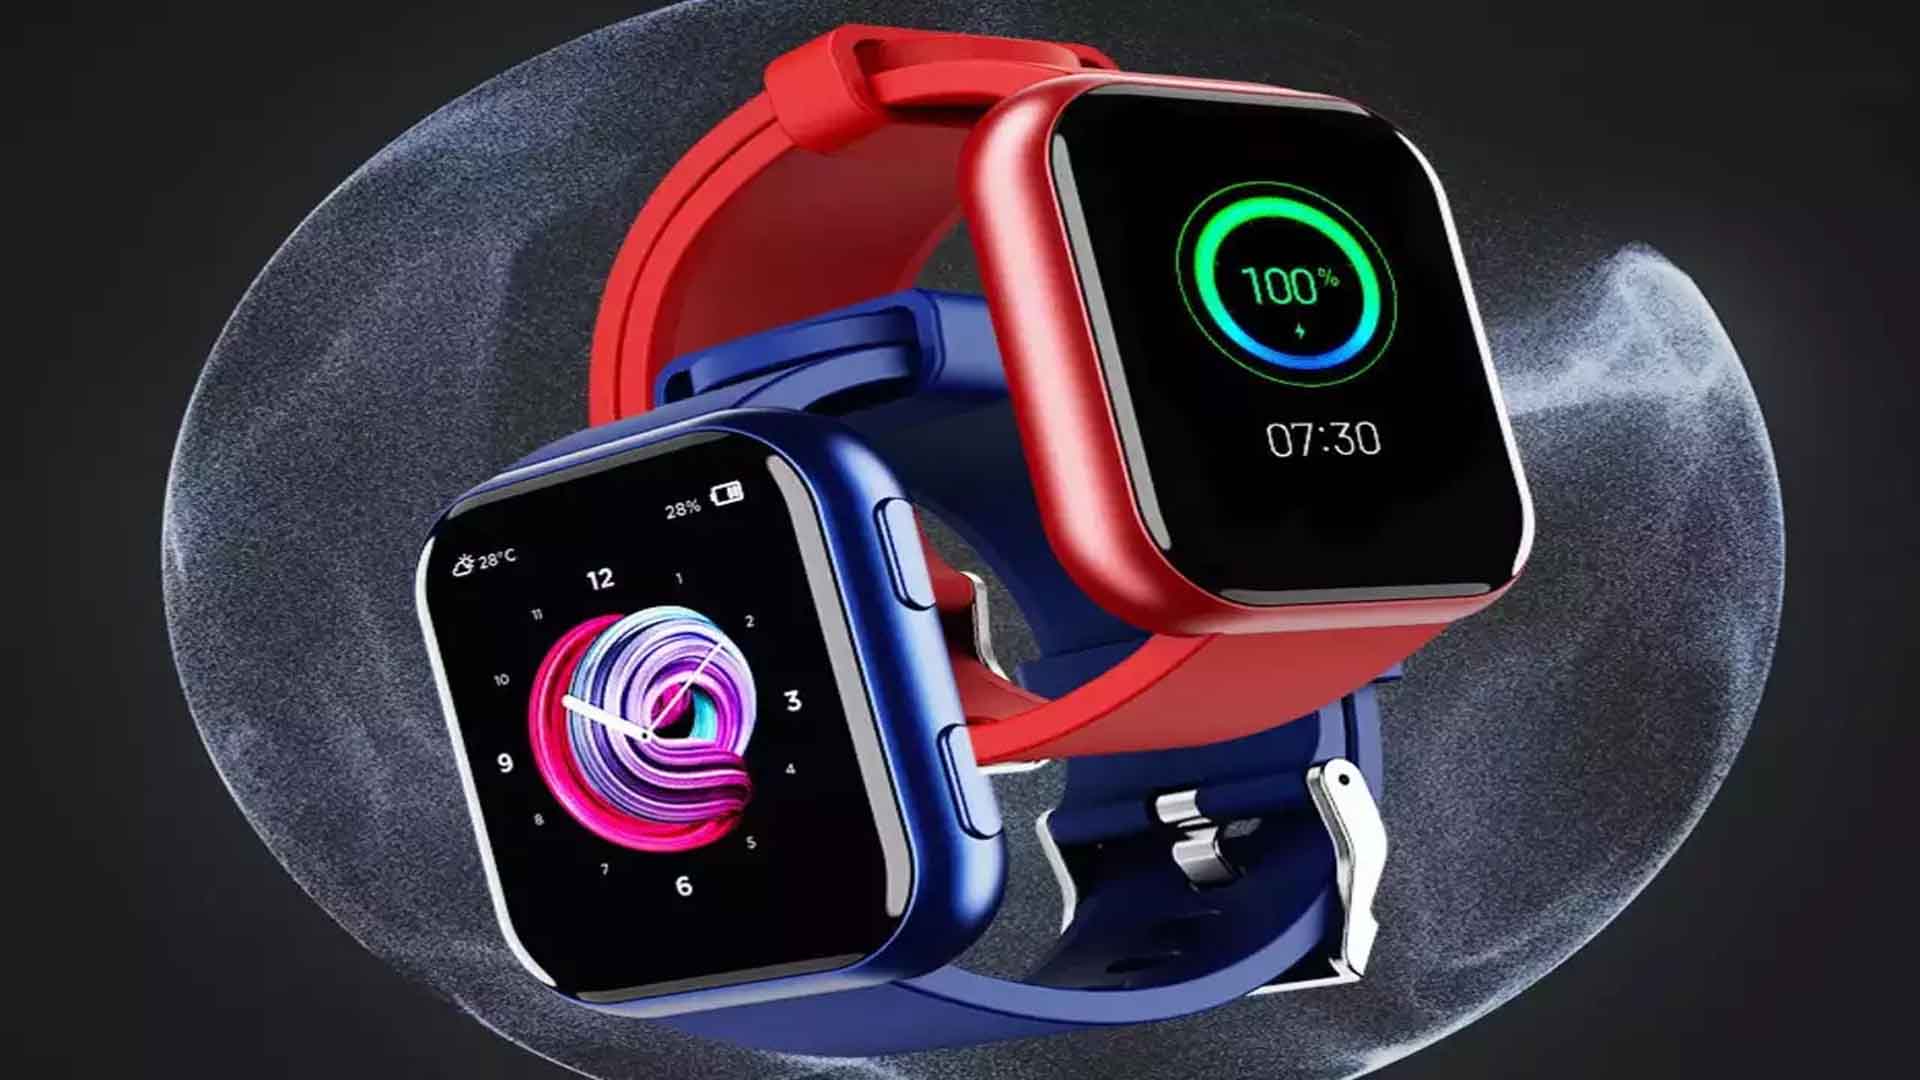 Blaze
Fast Charging Smart Watch with 1.75" (4.45 cm) HD Display, Upto 10 Days of Battery Life, Heart Rate & SPO2 Monitoring